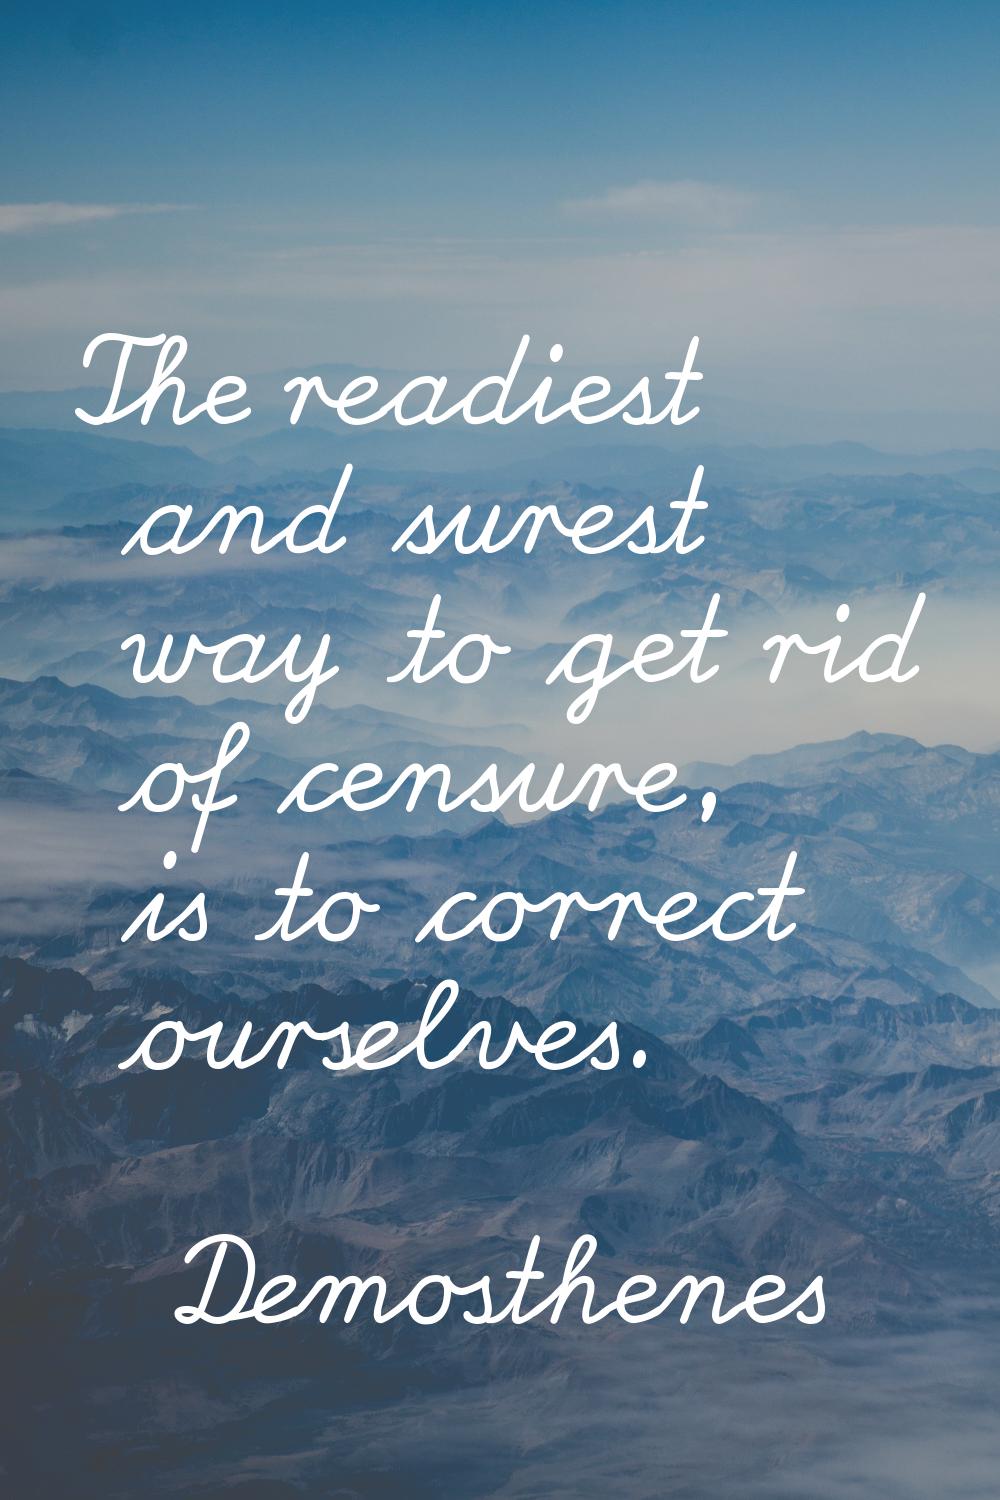 The readiest and surest way to get rid of censure, is to correct ourselves.